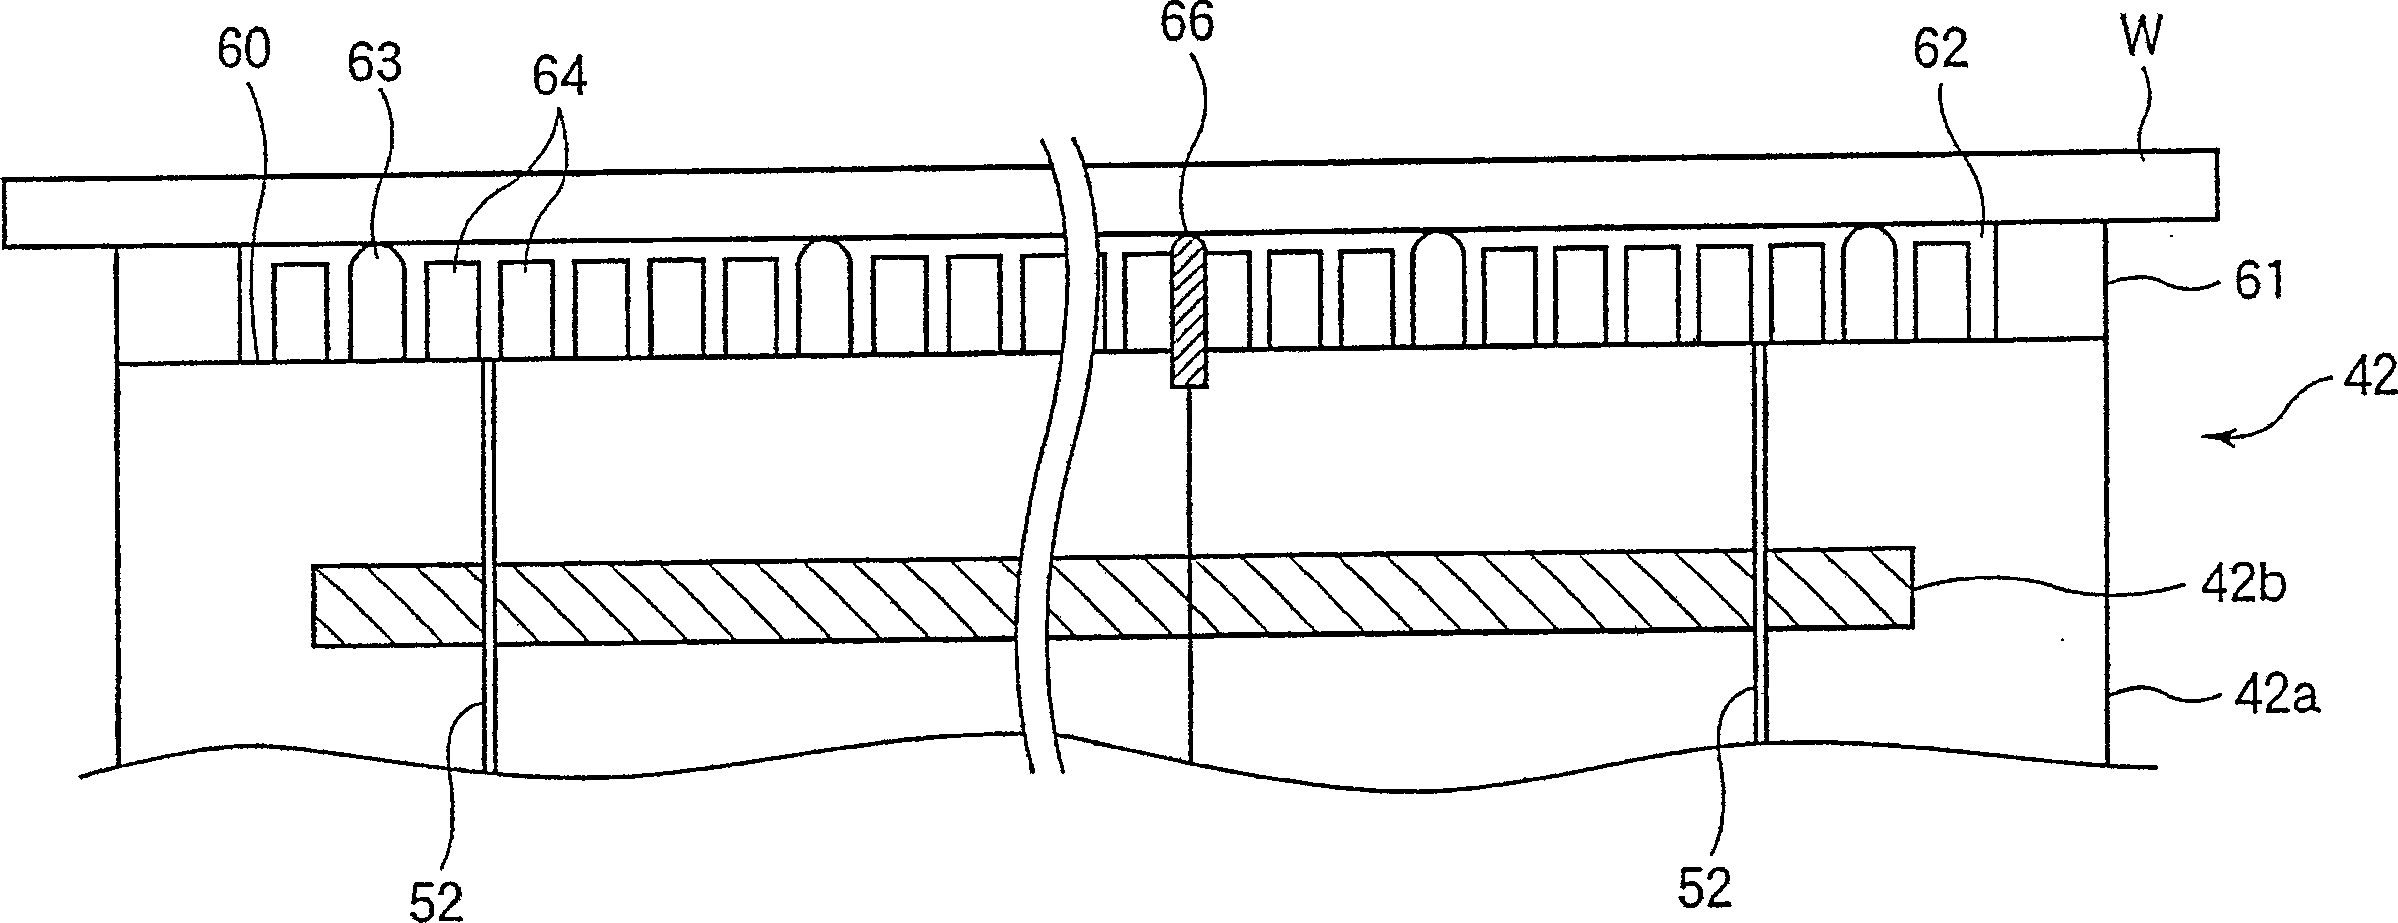 Substrate mounting table, substrate processing apparatus and substrate temperature control method